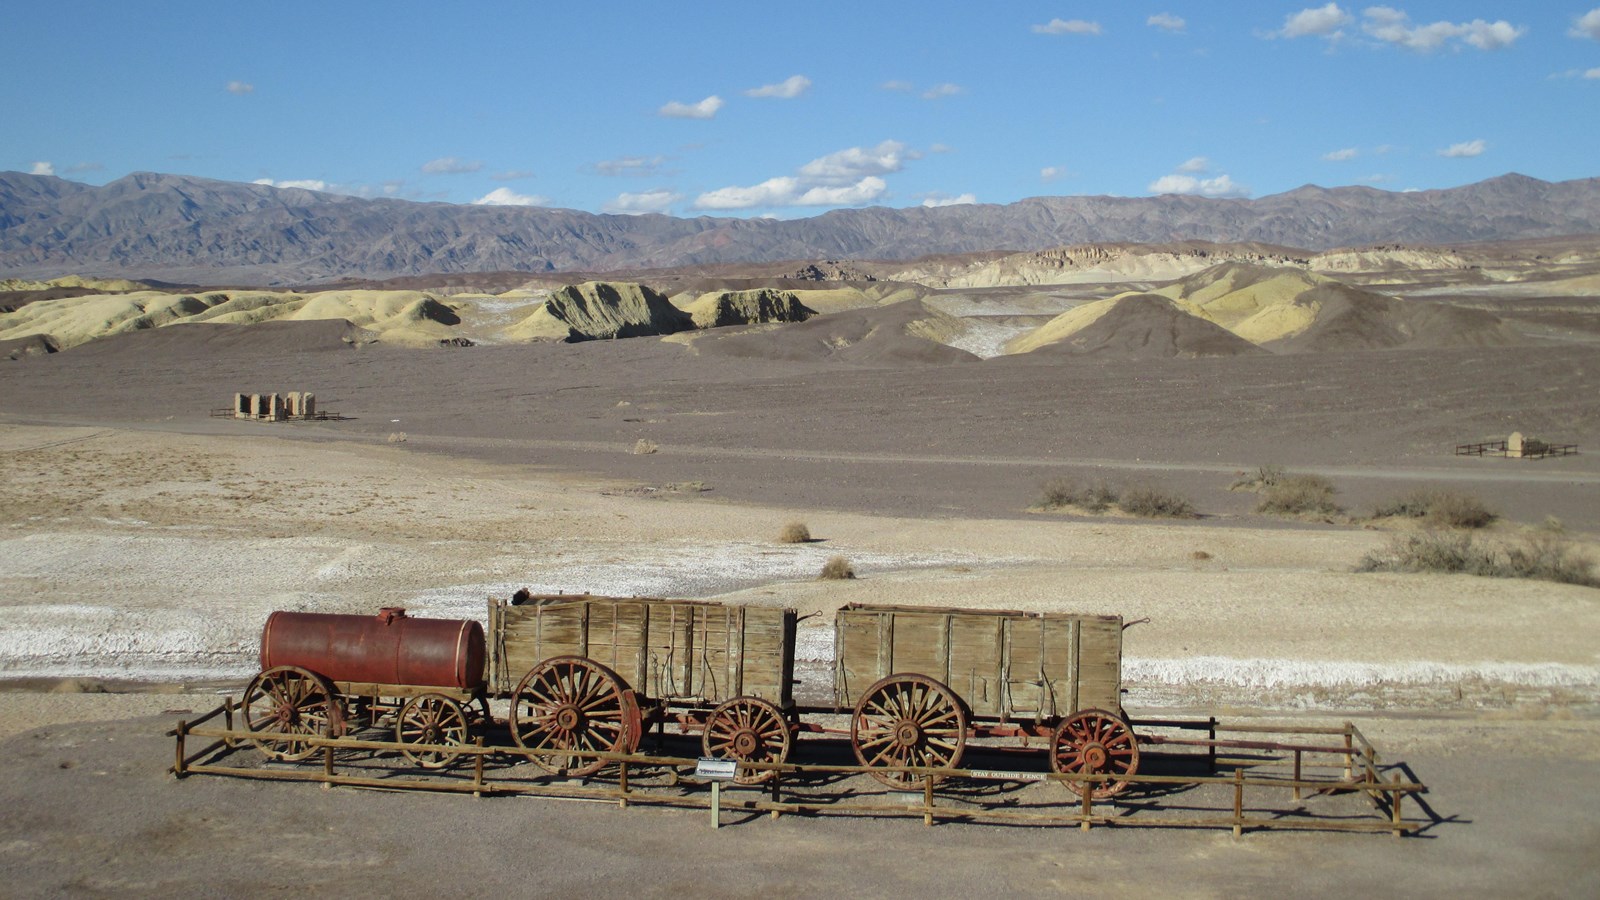 A large old double 20 Mule Team Wagon and water tank with yellow hills in the background.